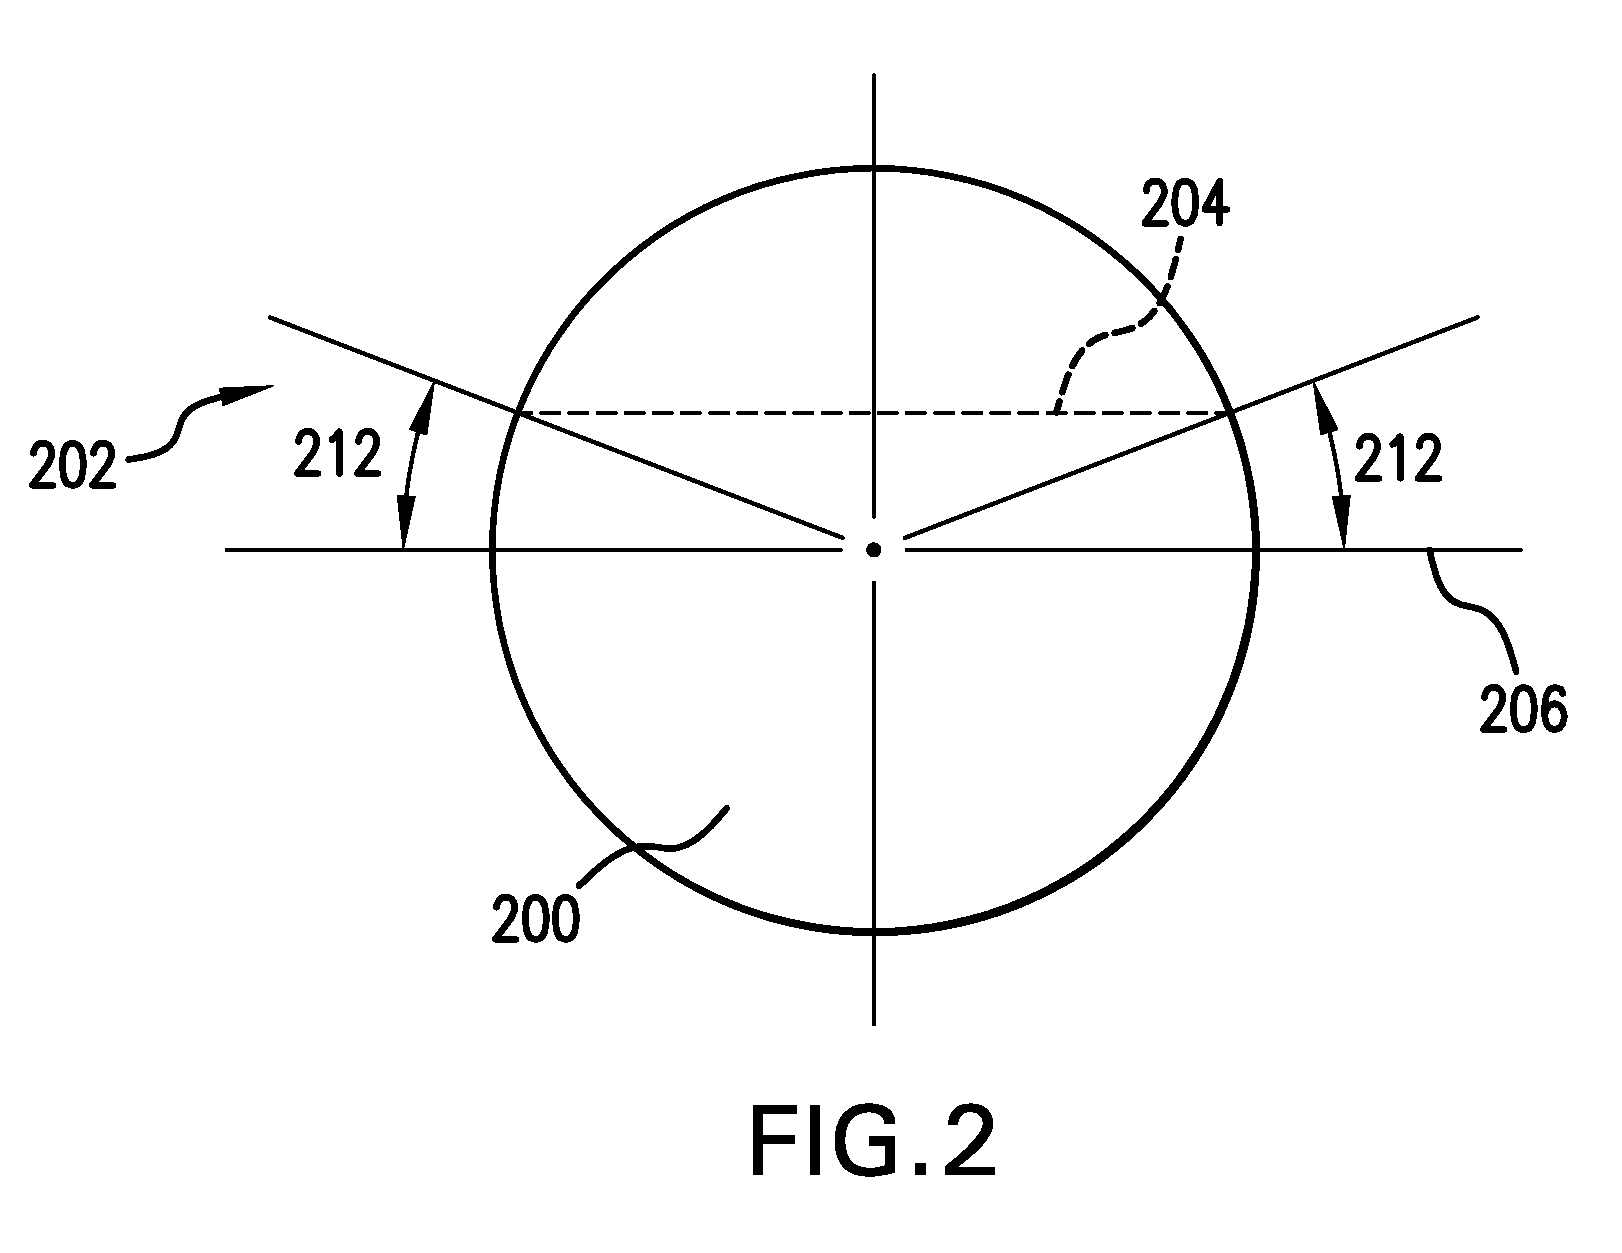 Parachute assemblies for training persons to catch an object in flight such as a ball